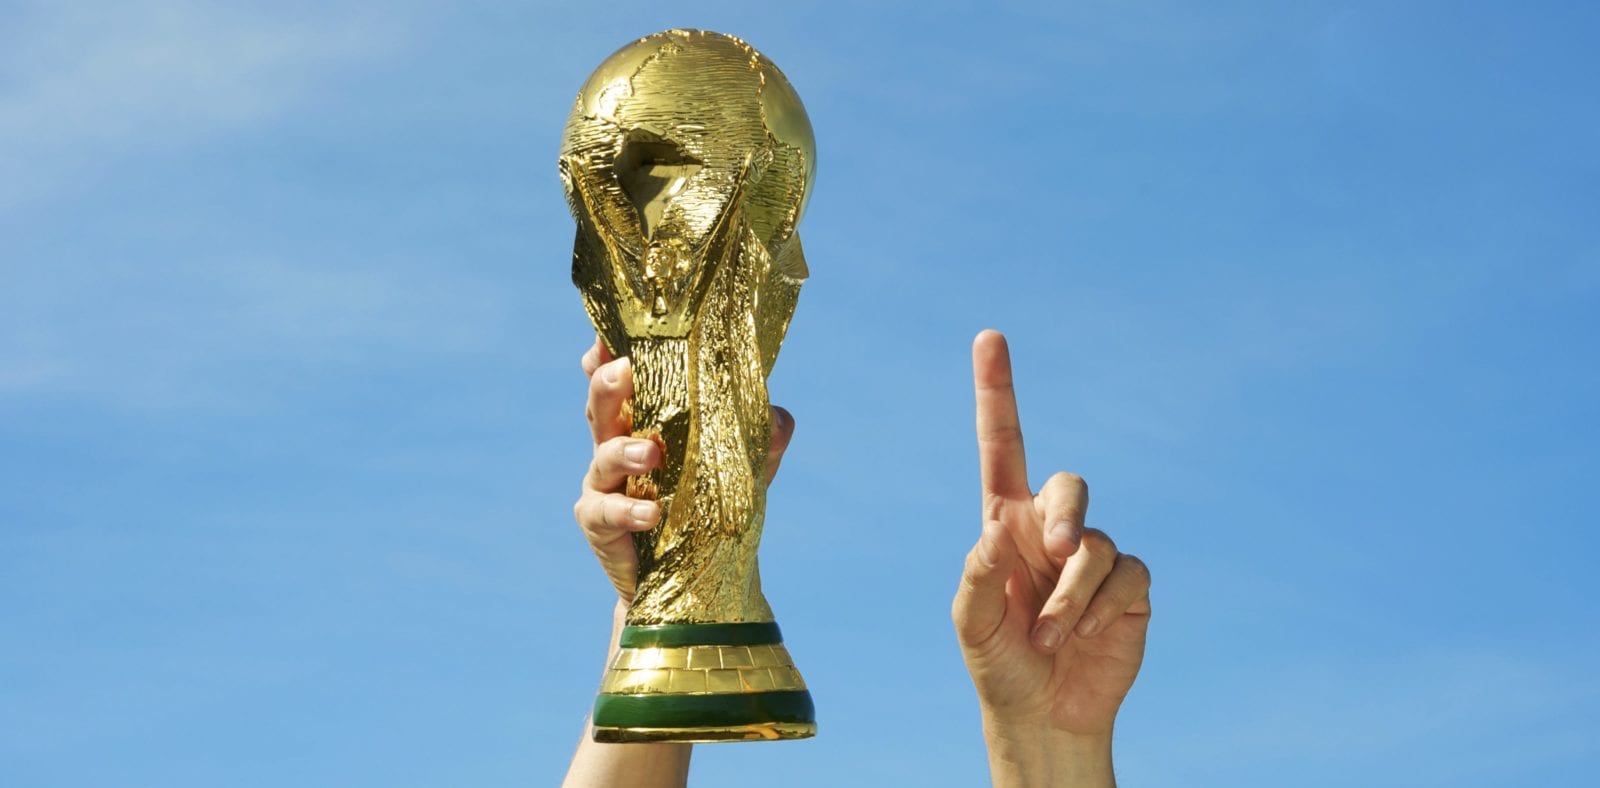 Top 15 most expensive sports trophies in the world right now